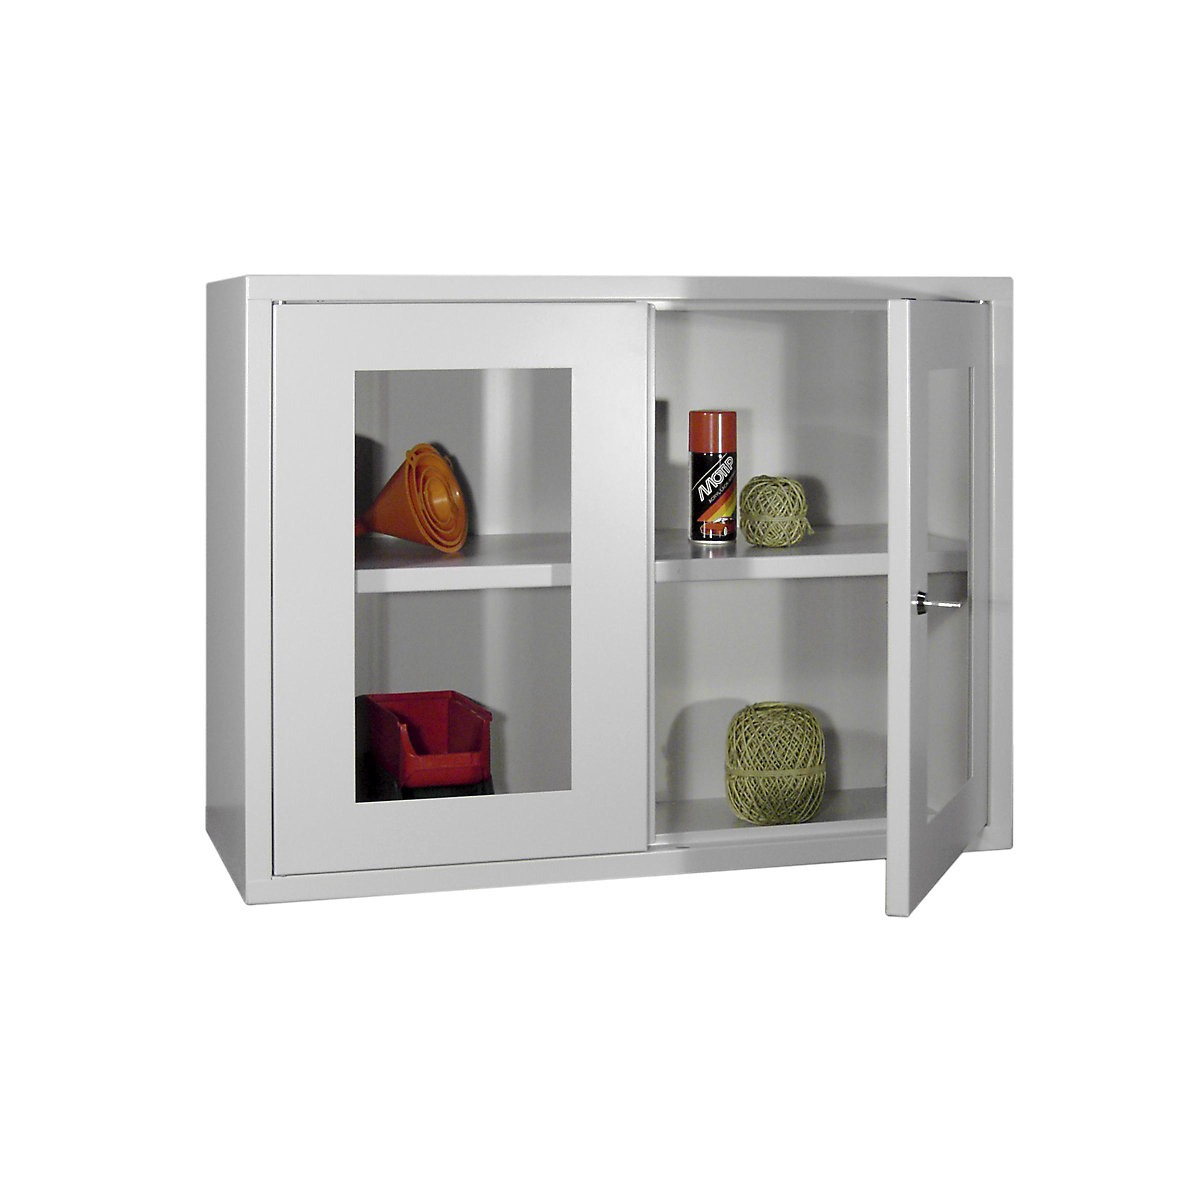 Wall mounted cupboard, height 600 mm – Pavoy, with vision panel door/s, width 800 mm, solid rear panel, grey-6